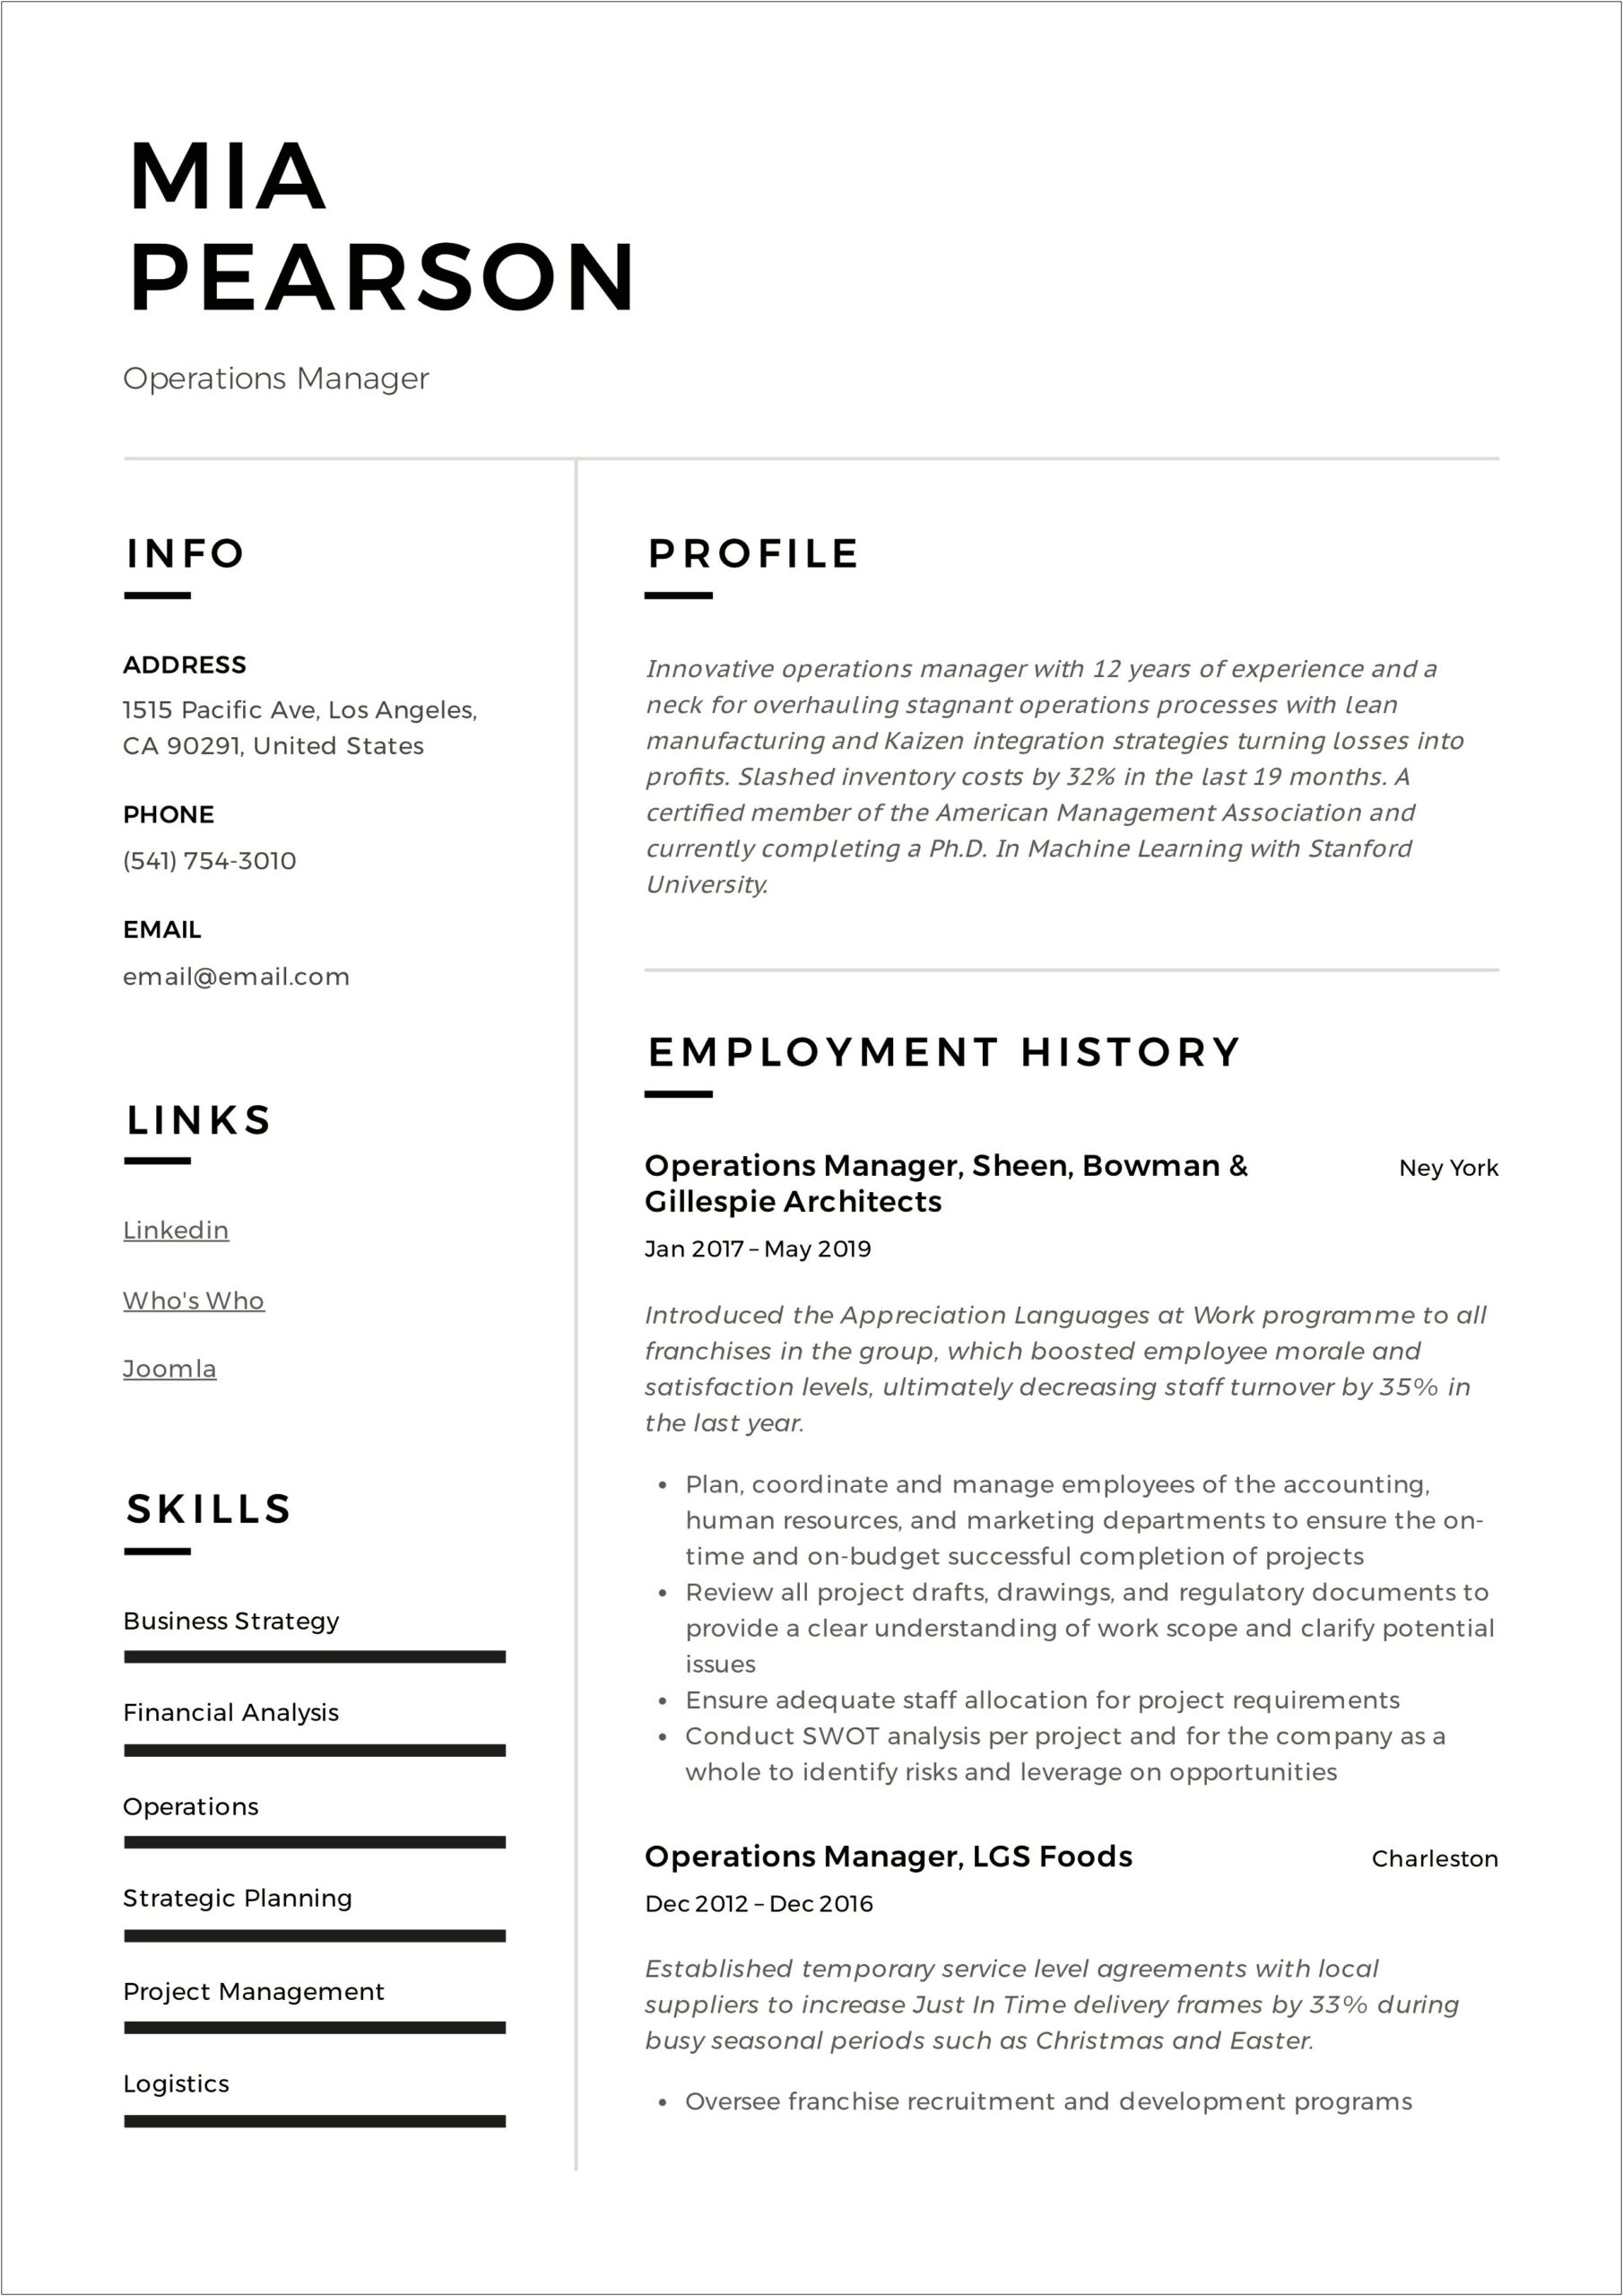 Operations Manager Resume Professional Summary